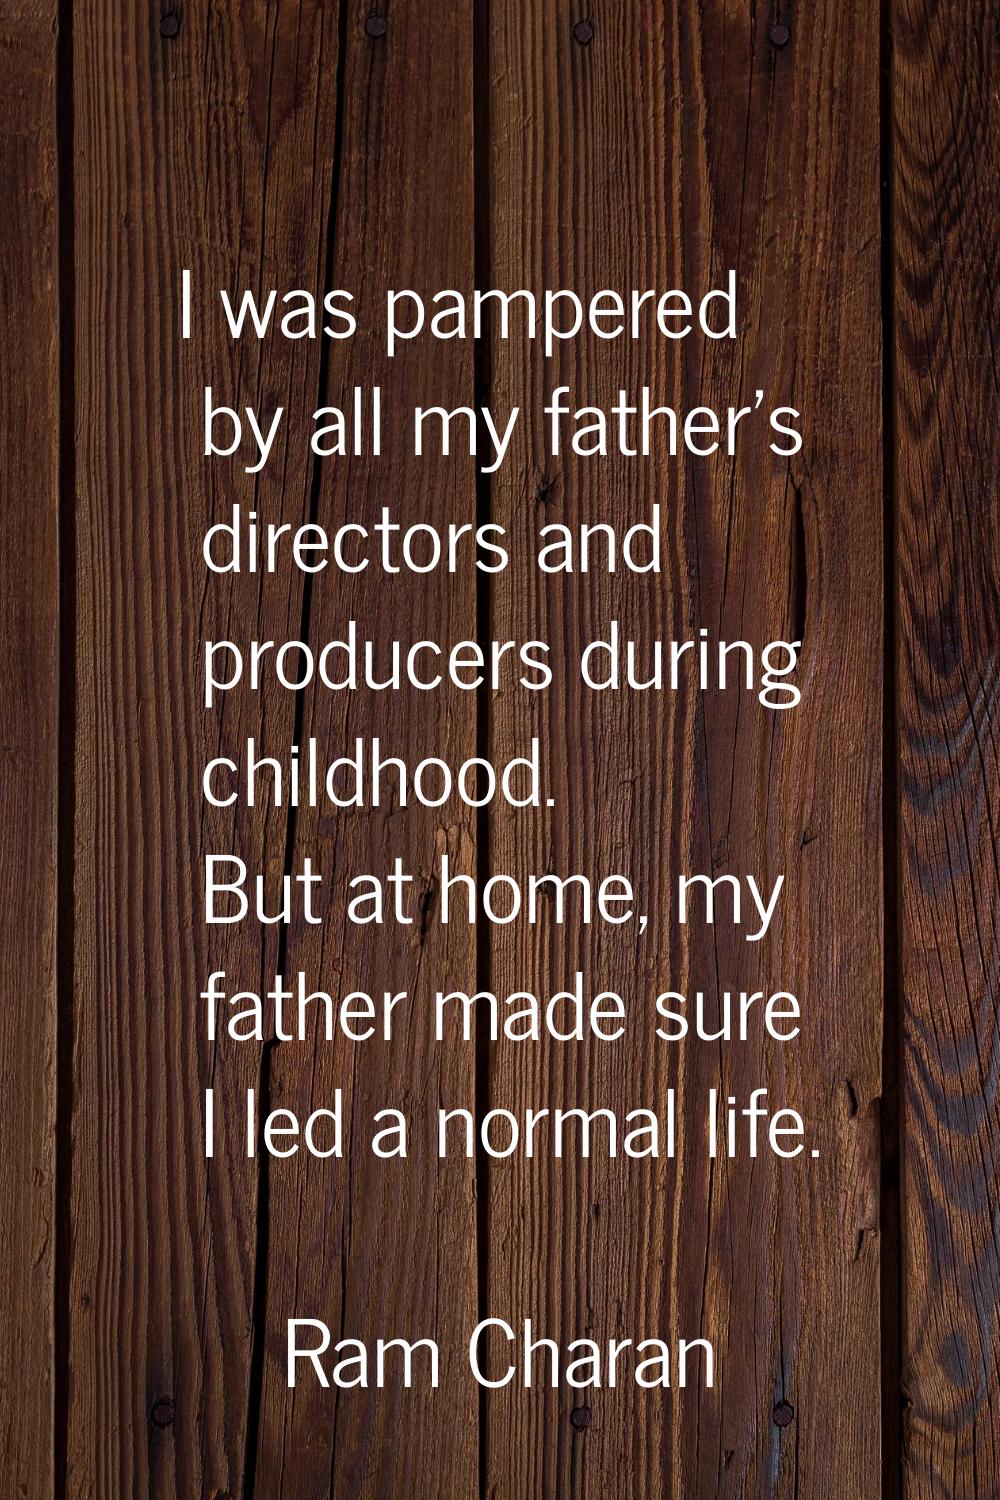 I was pampered by all my father's directors and producers during childhood. But at home, my father 